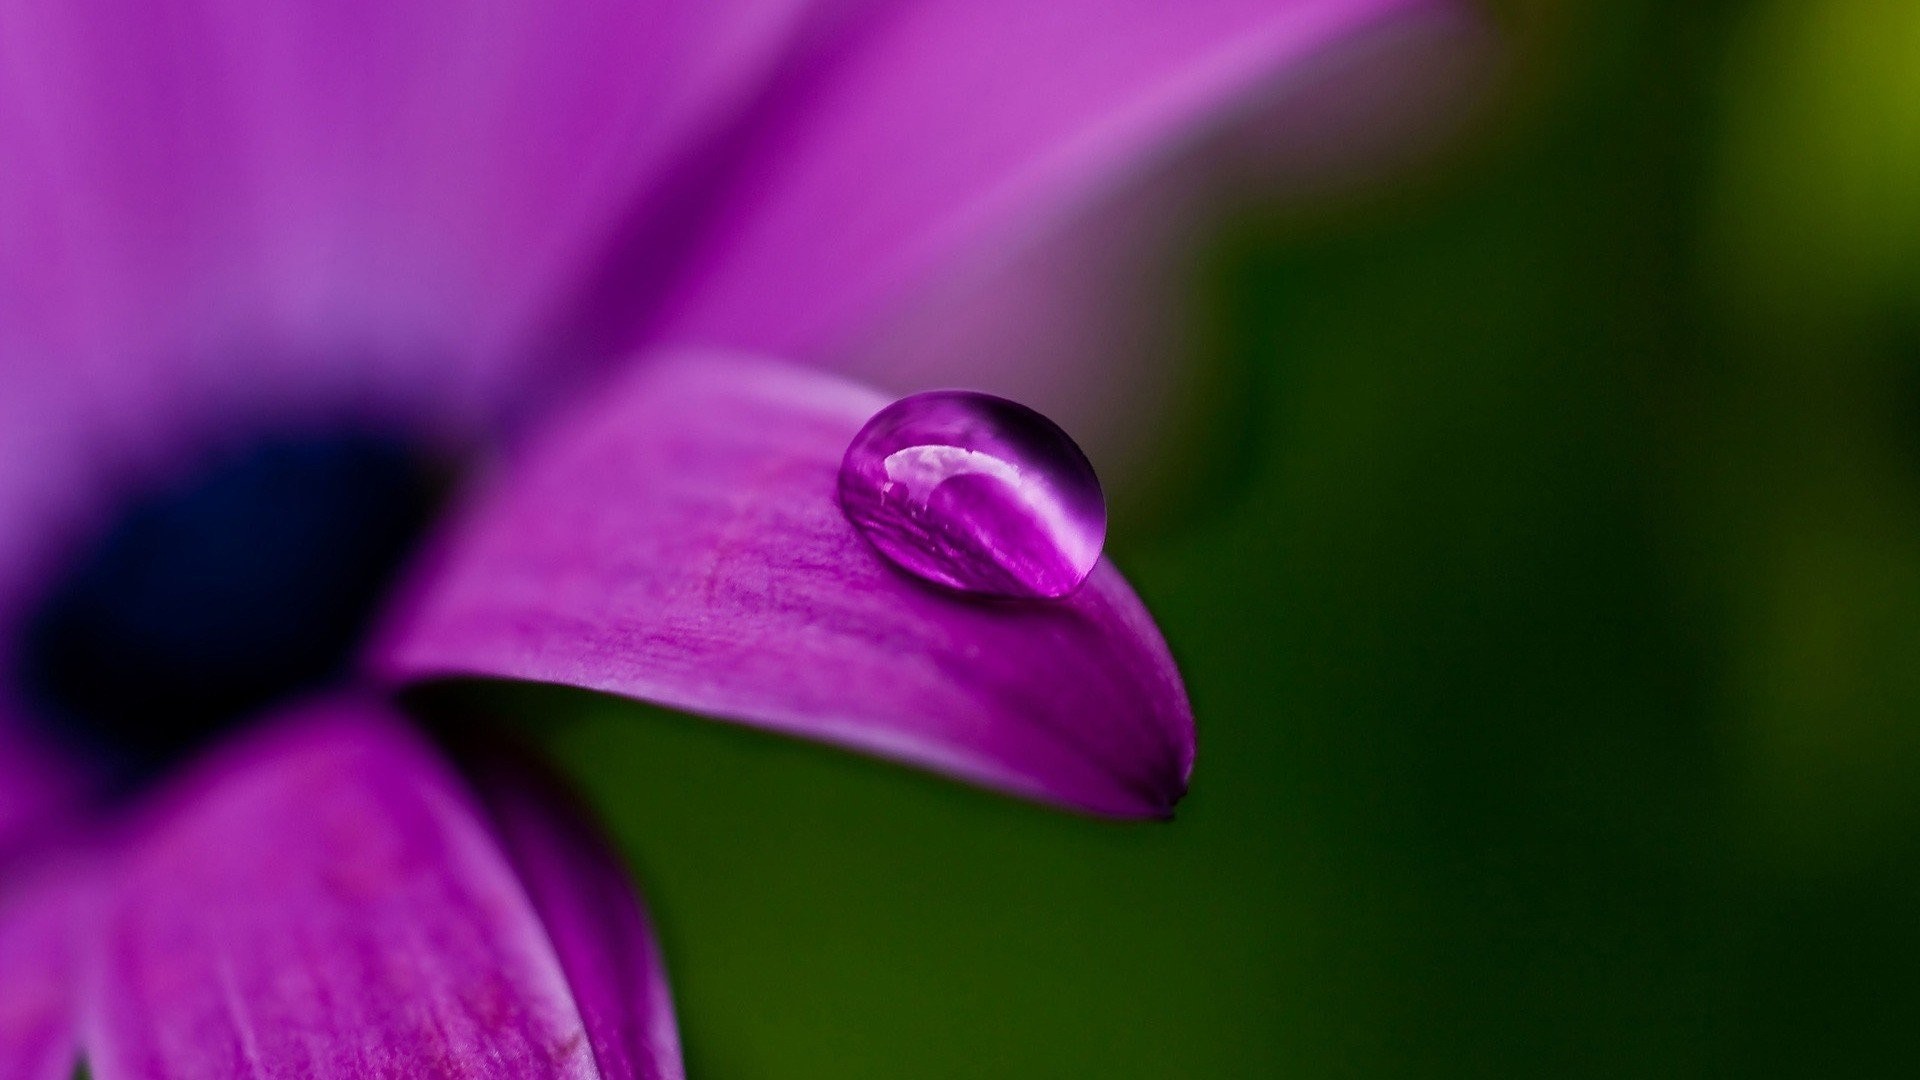 Flowers Droplets Wallpapers Hd Pictures One Hd Wallpaper - Water Droplet On Flower - HD Wallpaper 